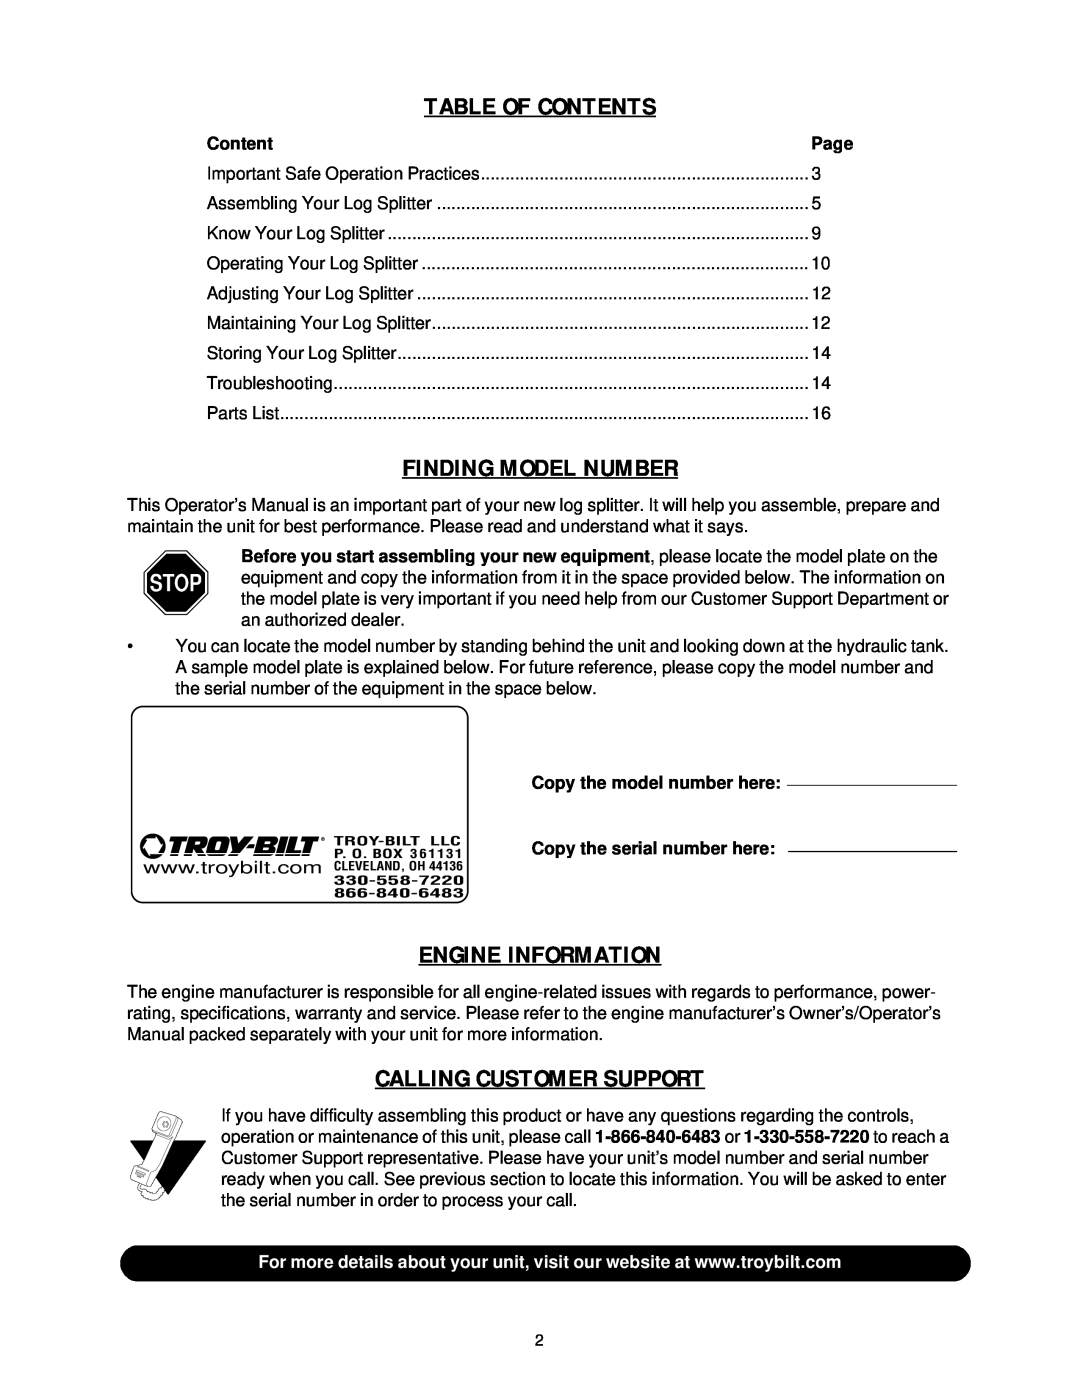 Troy-Bilt LS338 manual Table Of Contents, Finding Model Number, Engine Information, Calling Customer Support 